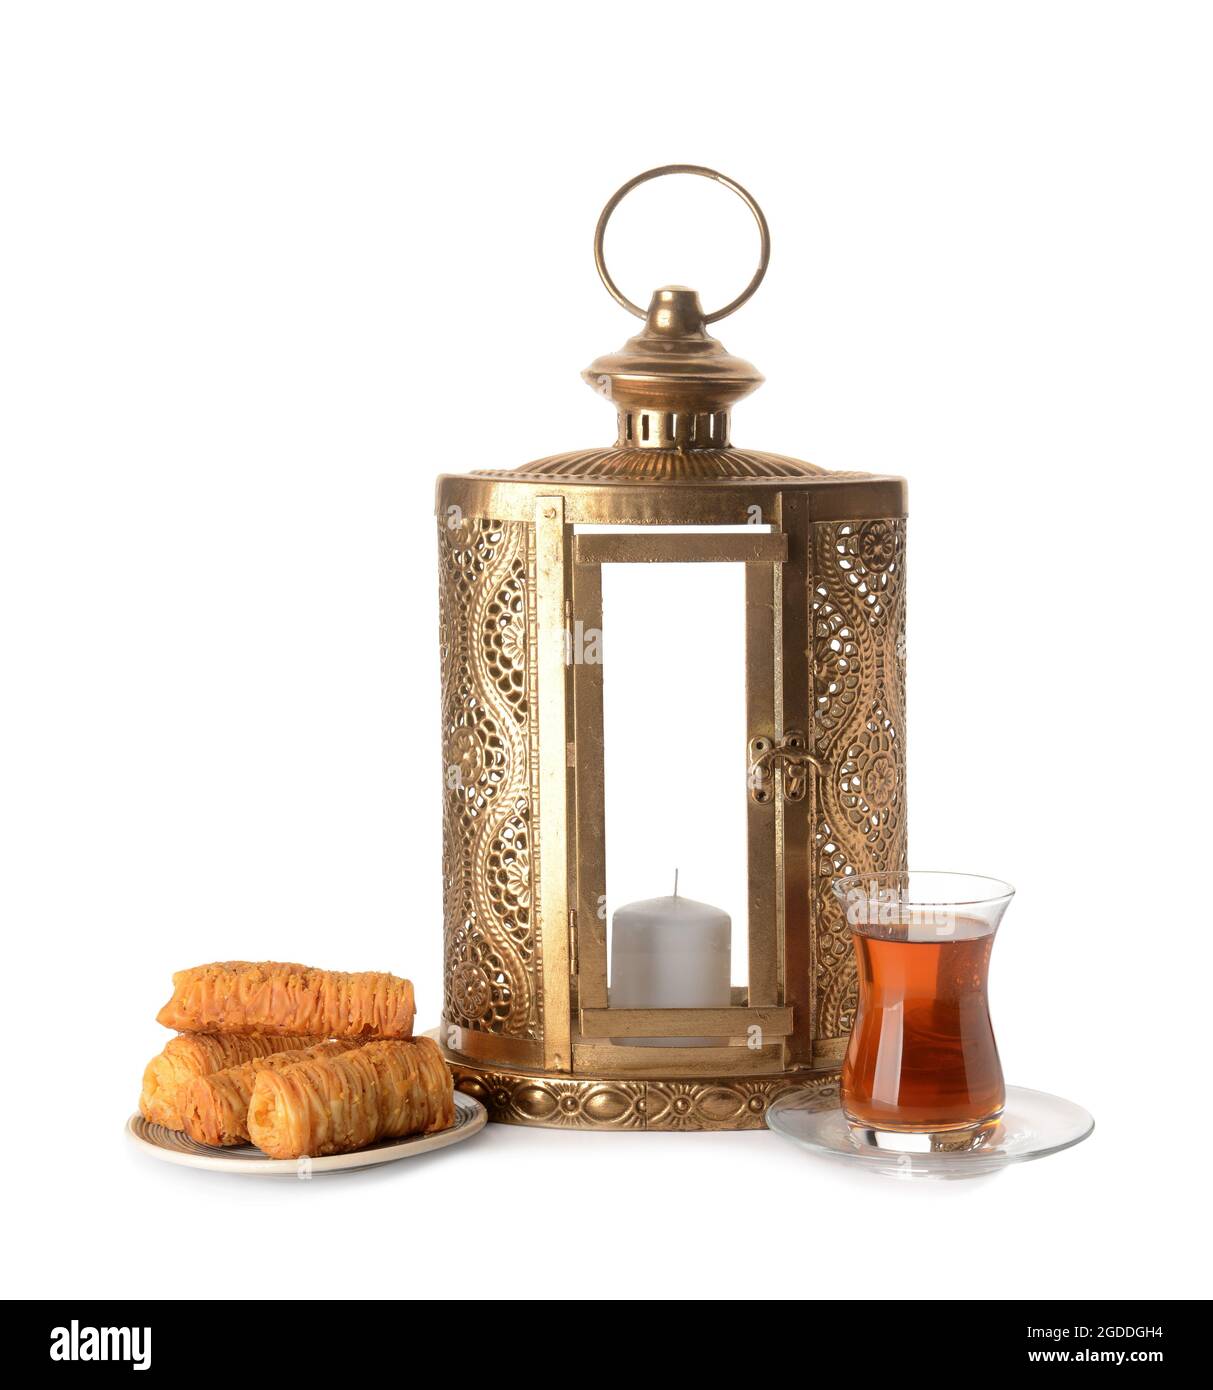 Muslim lantern with Turkish sweets and tea on white background Stock Photo